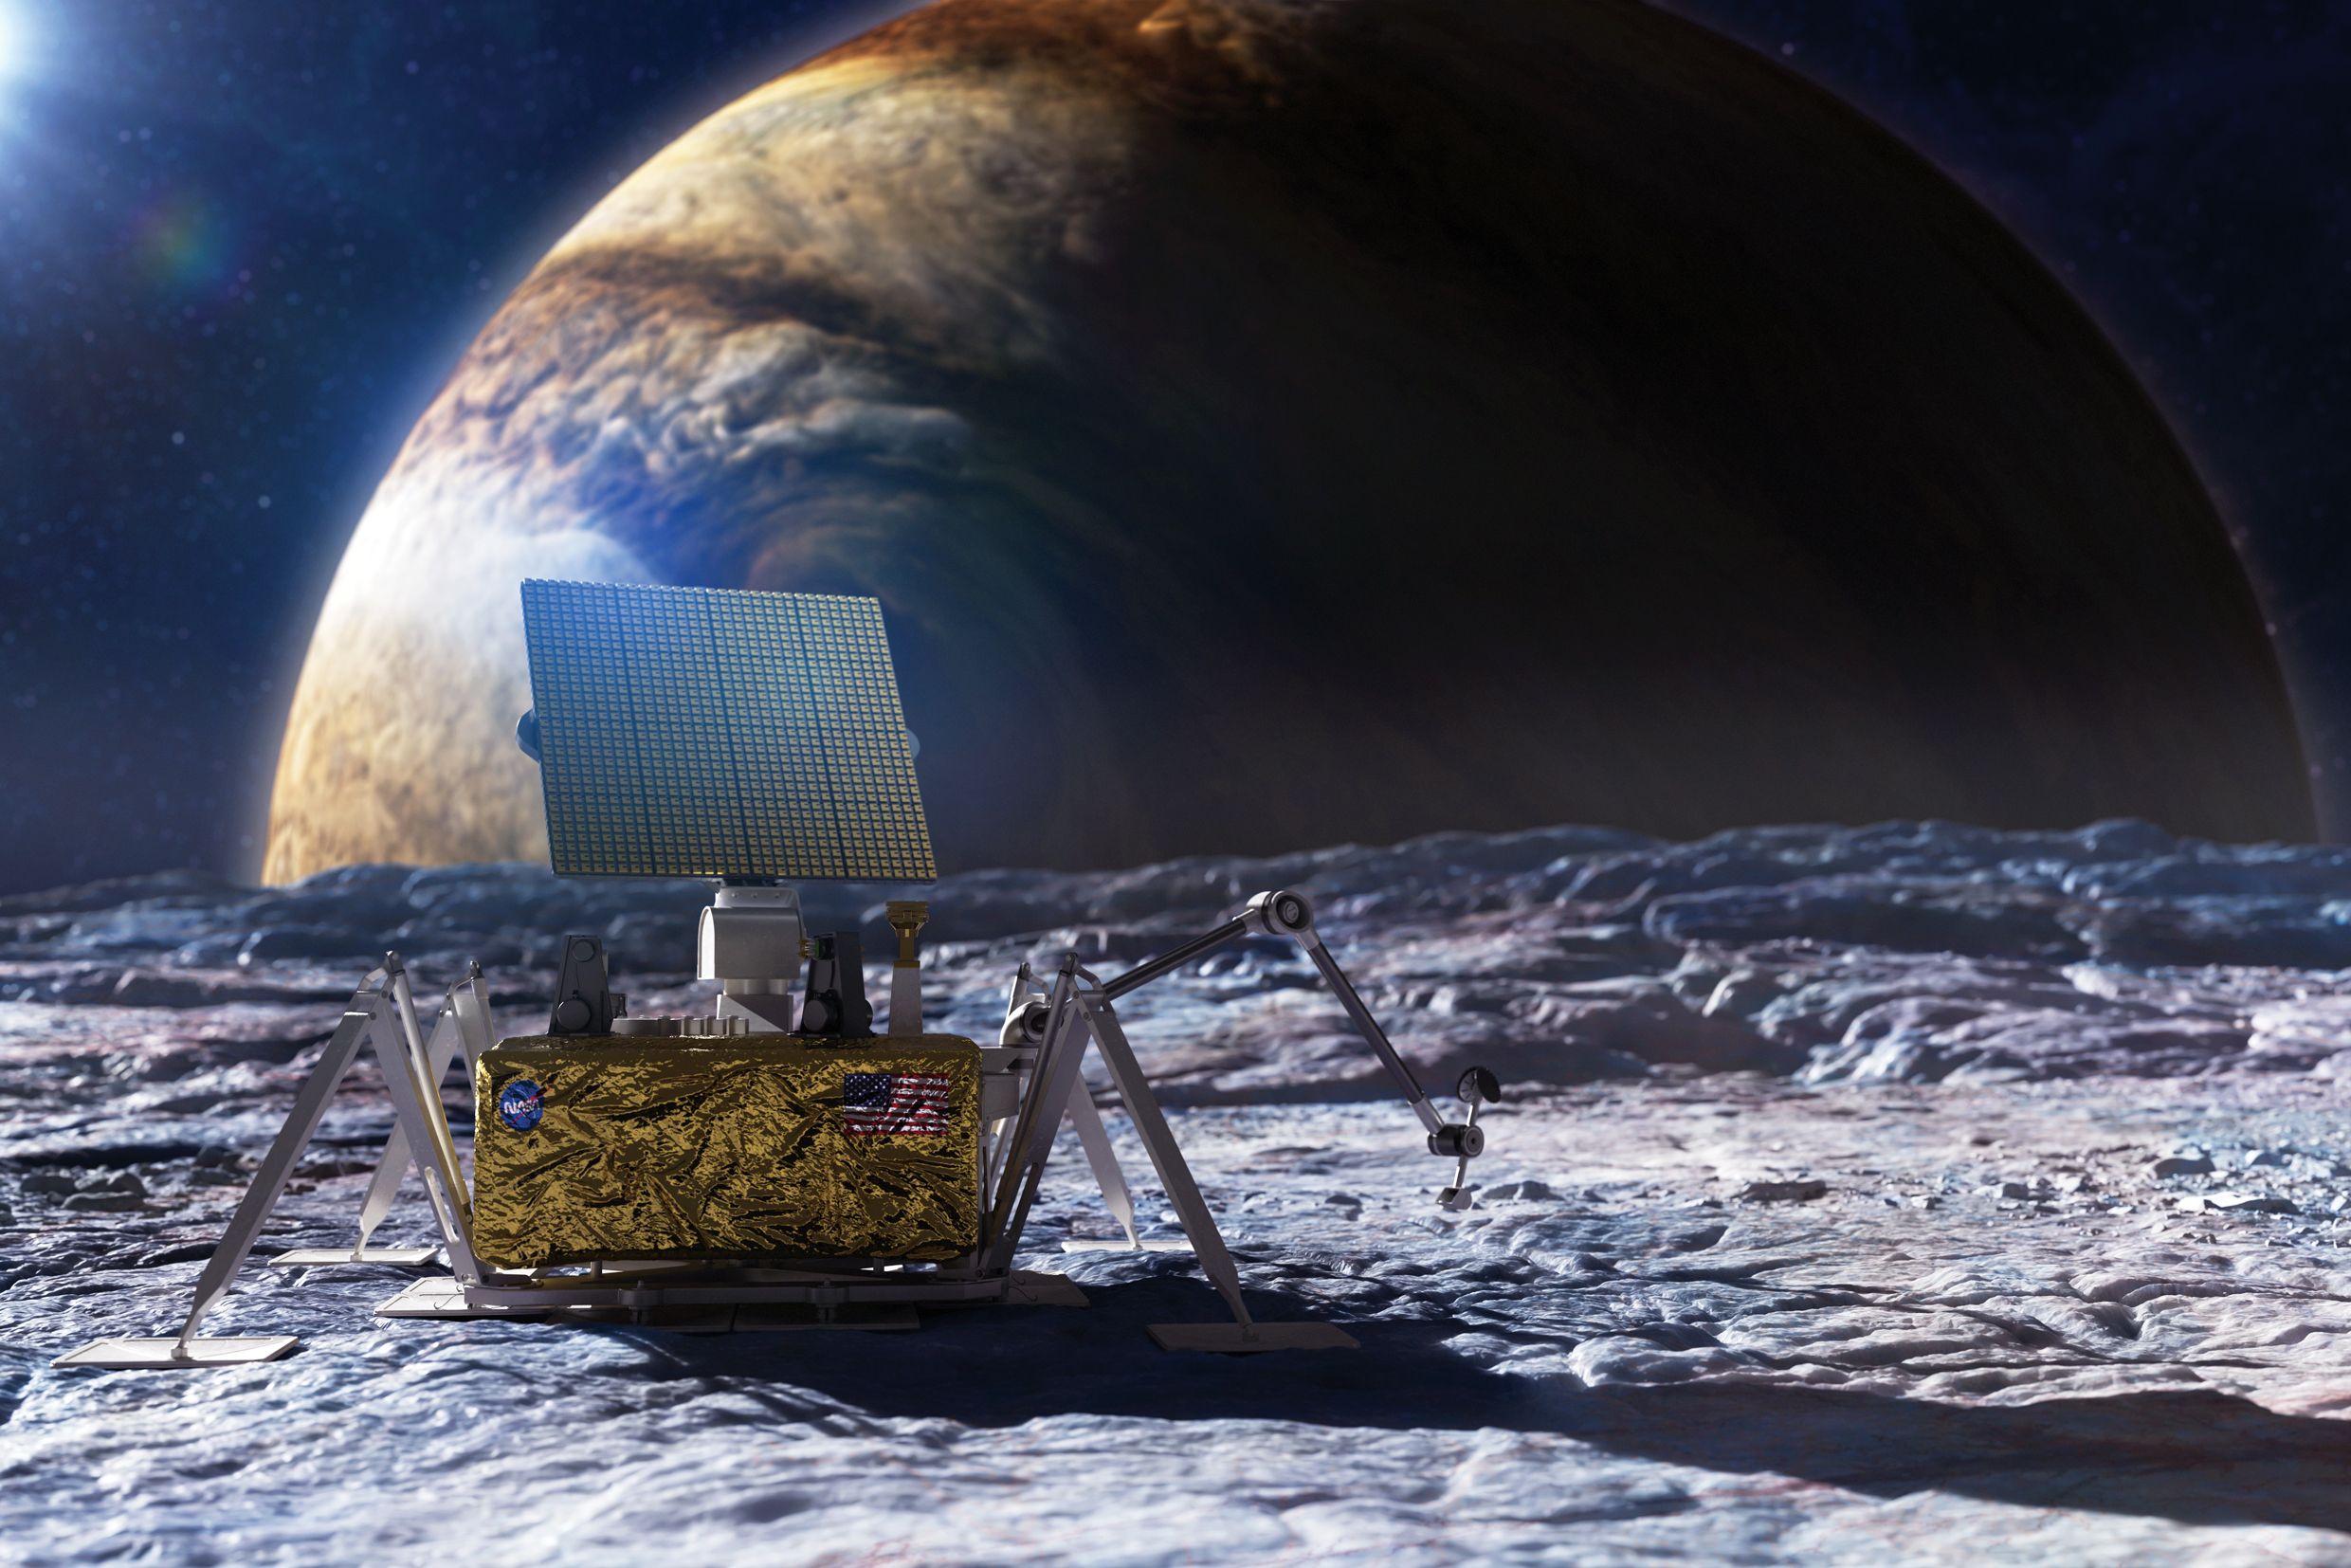 Illustration of an antenna on a moon with Jupiter in the background.